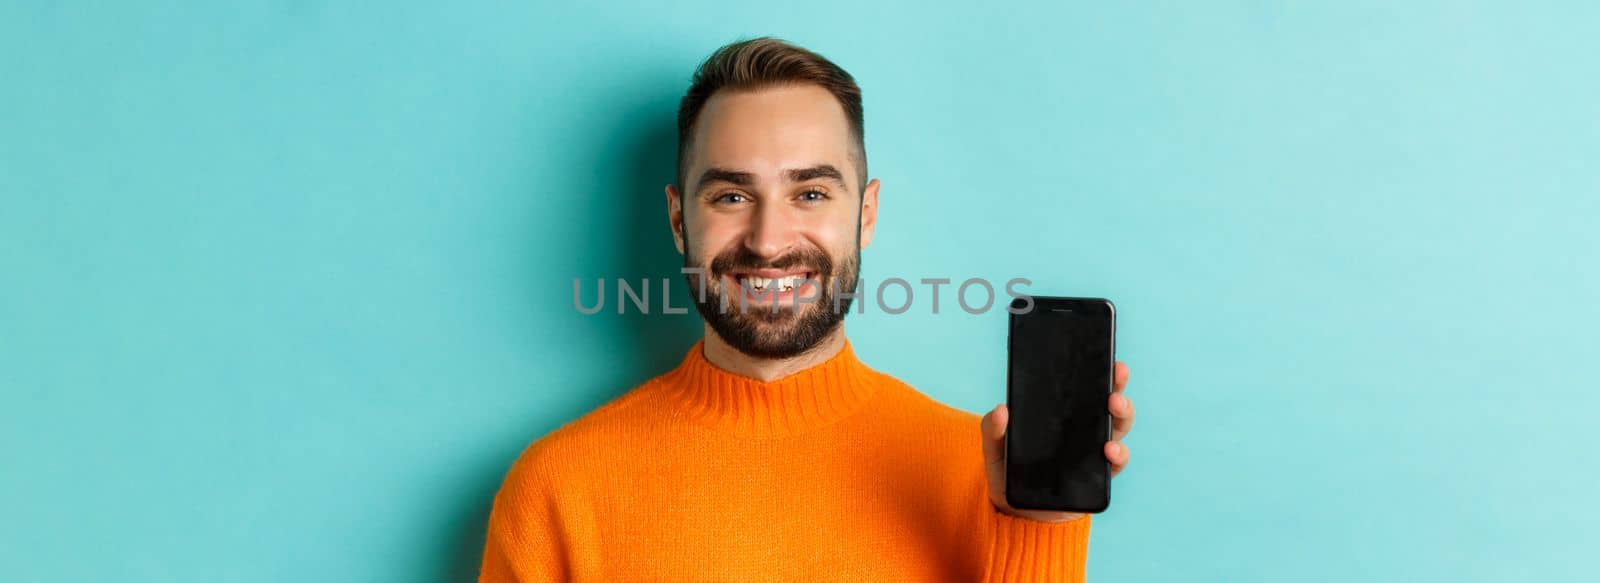 Close-up of handsome bearded guy in orange sweater, showing smartphone screen and smiling, showing promo online, turquoise background.